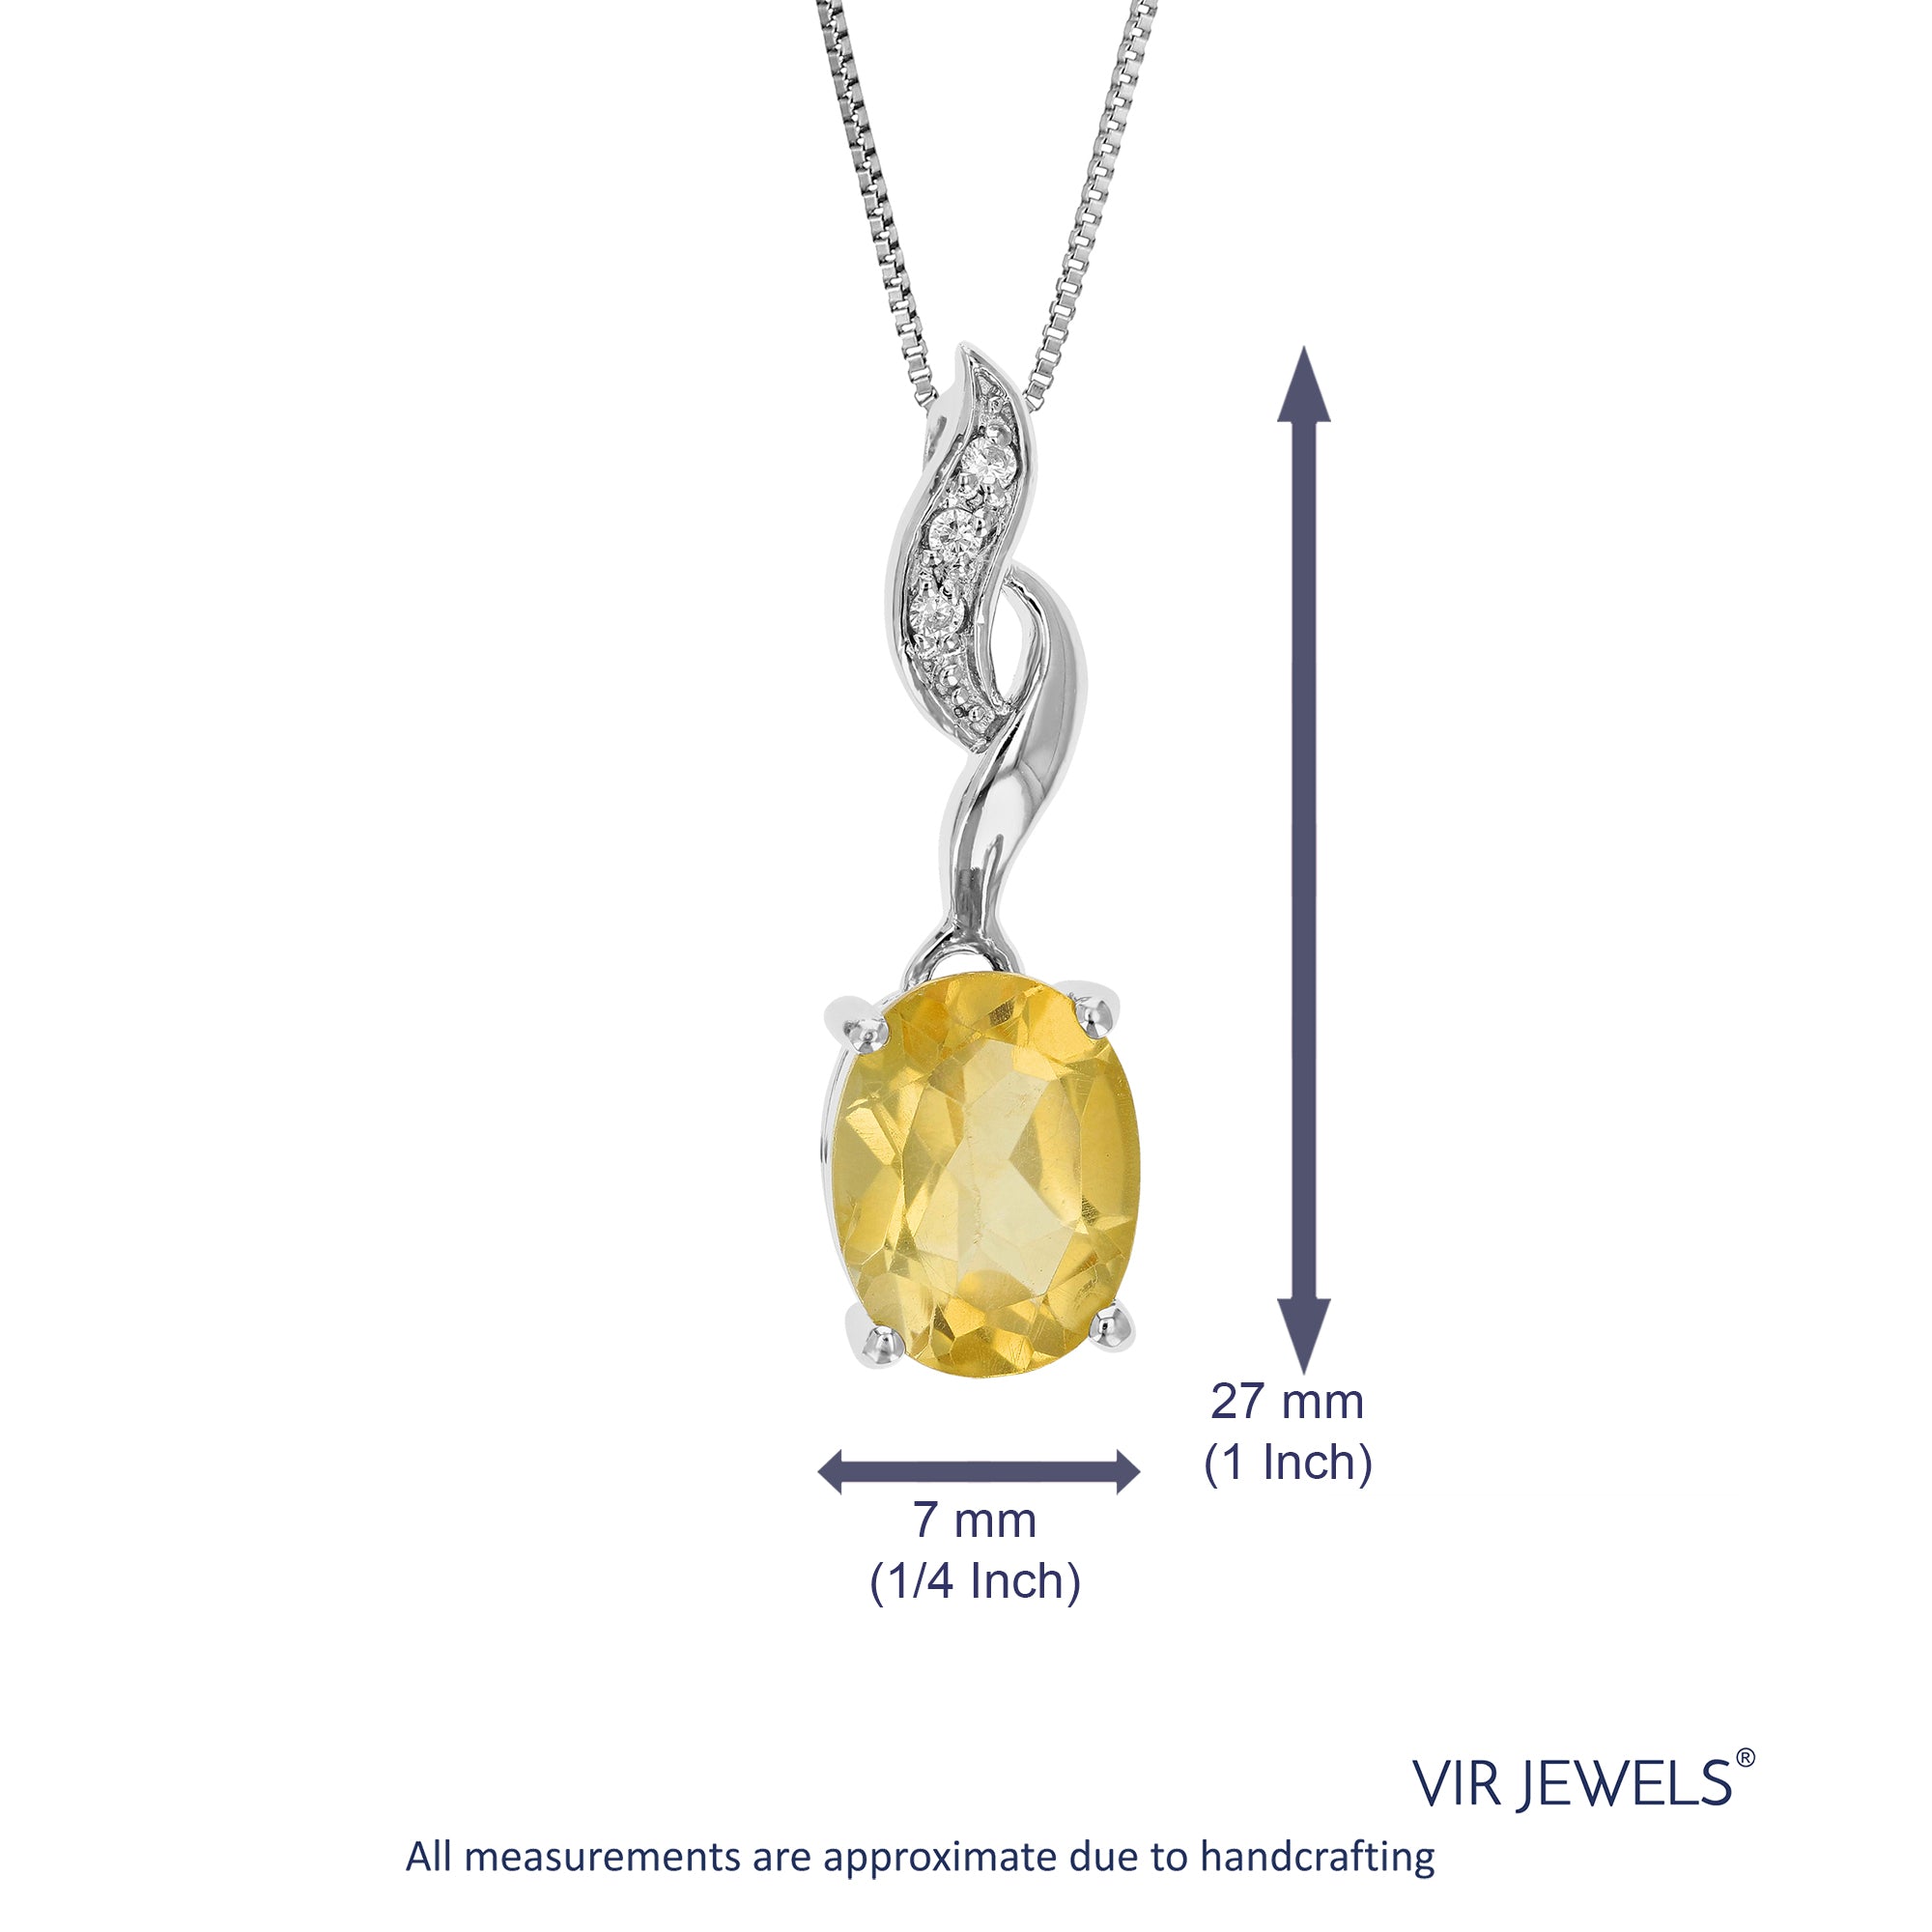 2.10 cttw Pendant Necklace, Citrine Oval Pendant Necklace for Women in .925 Sterling Silver with Rhodium, 18 Inch Chain, Prong Setting